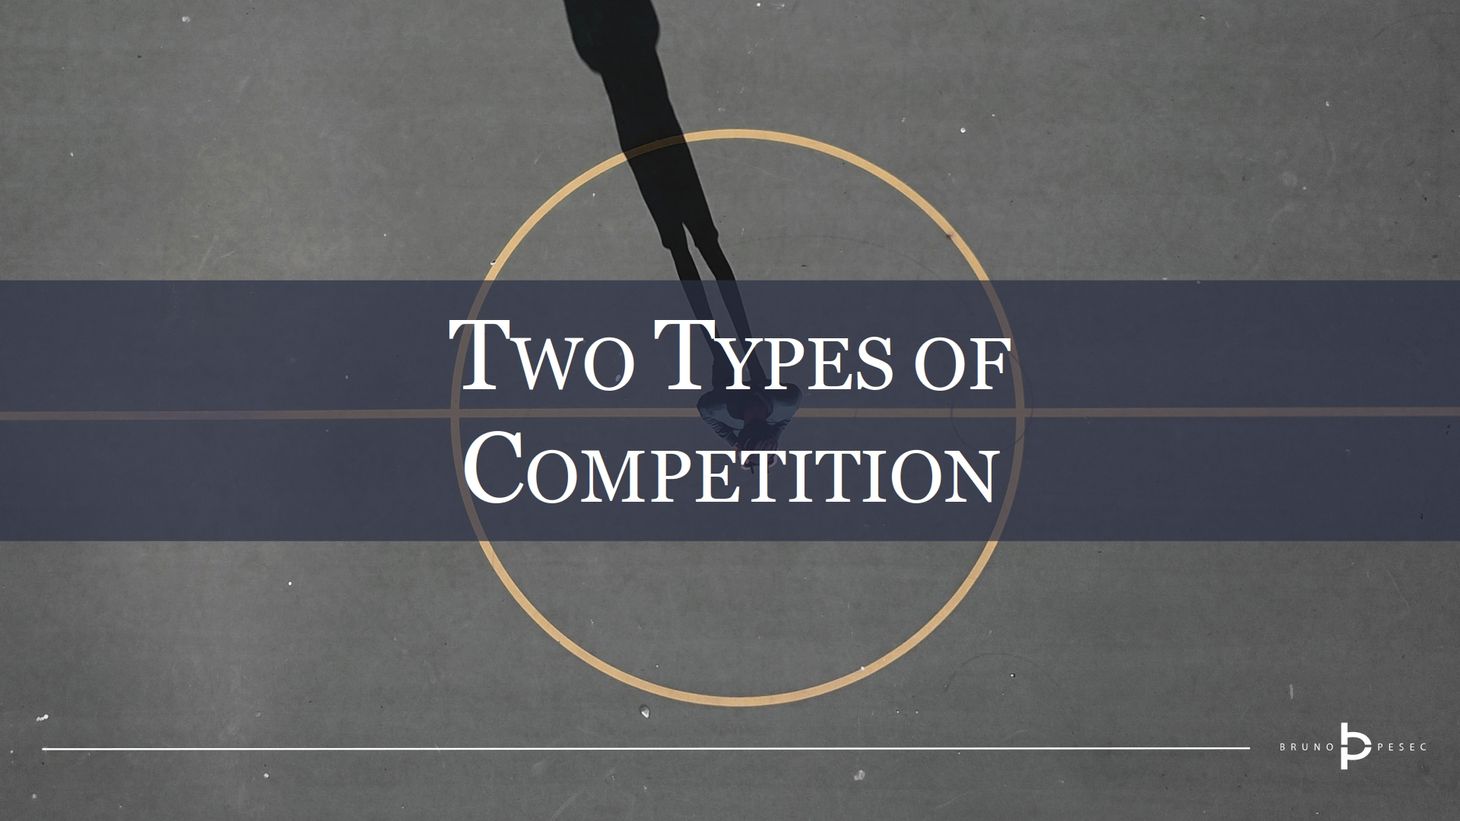 Two types of competition